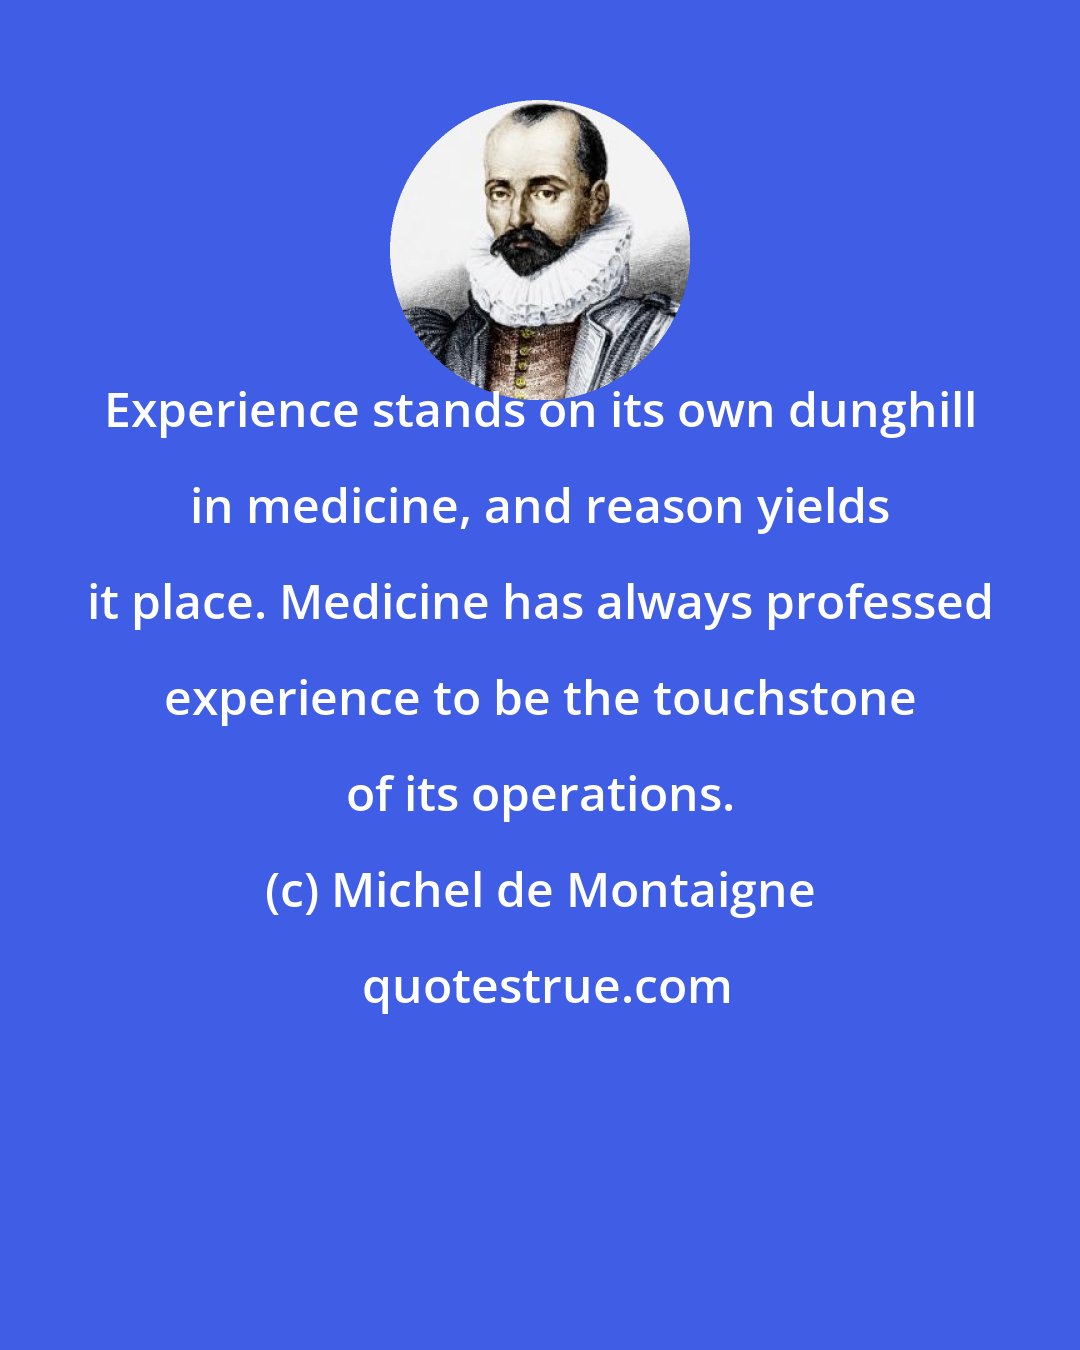 Michel de Montaigne: Experience stands on its own dunghill in medicine, and reason yields it place. Medicine has always professed experience to be the touchstone of its operations.